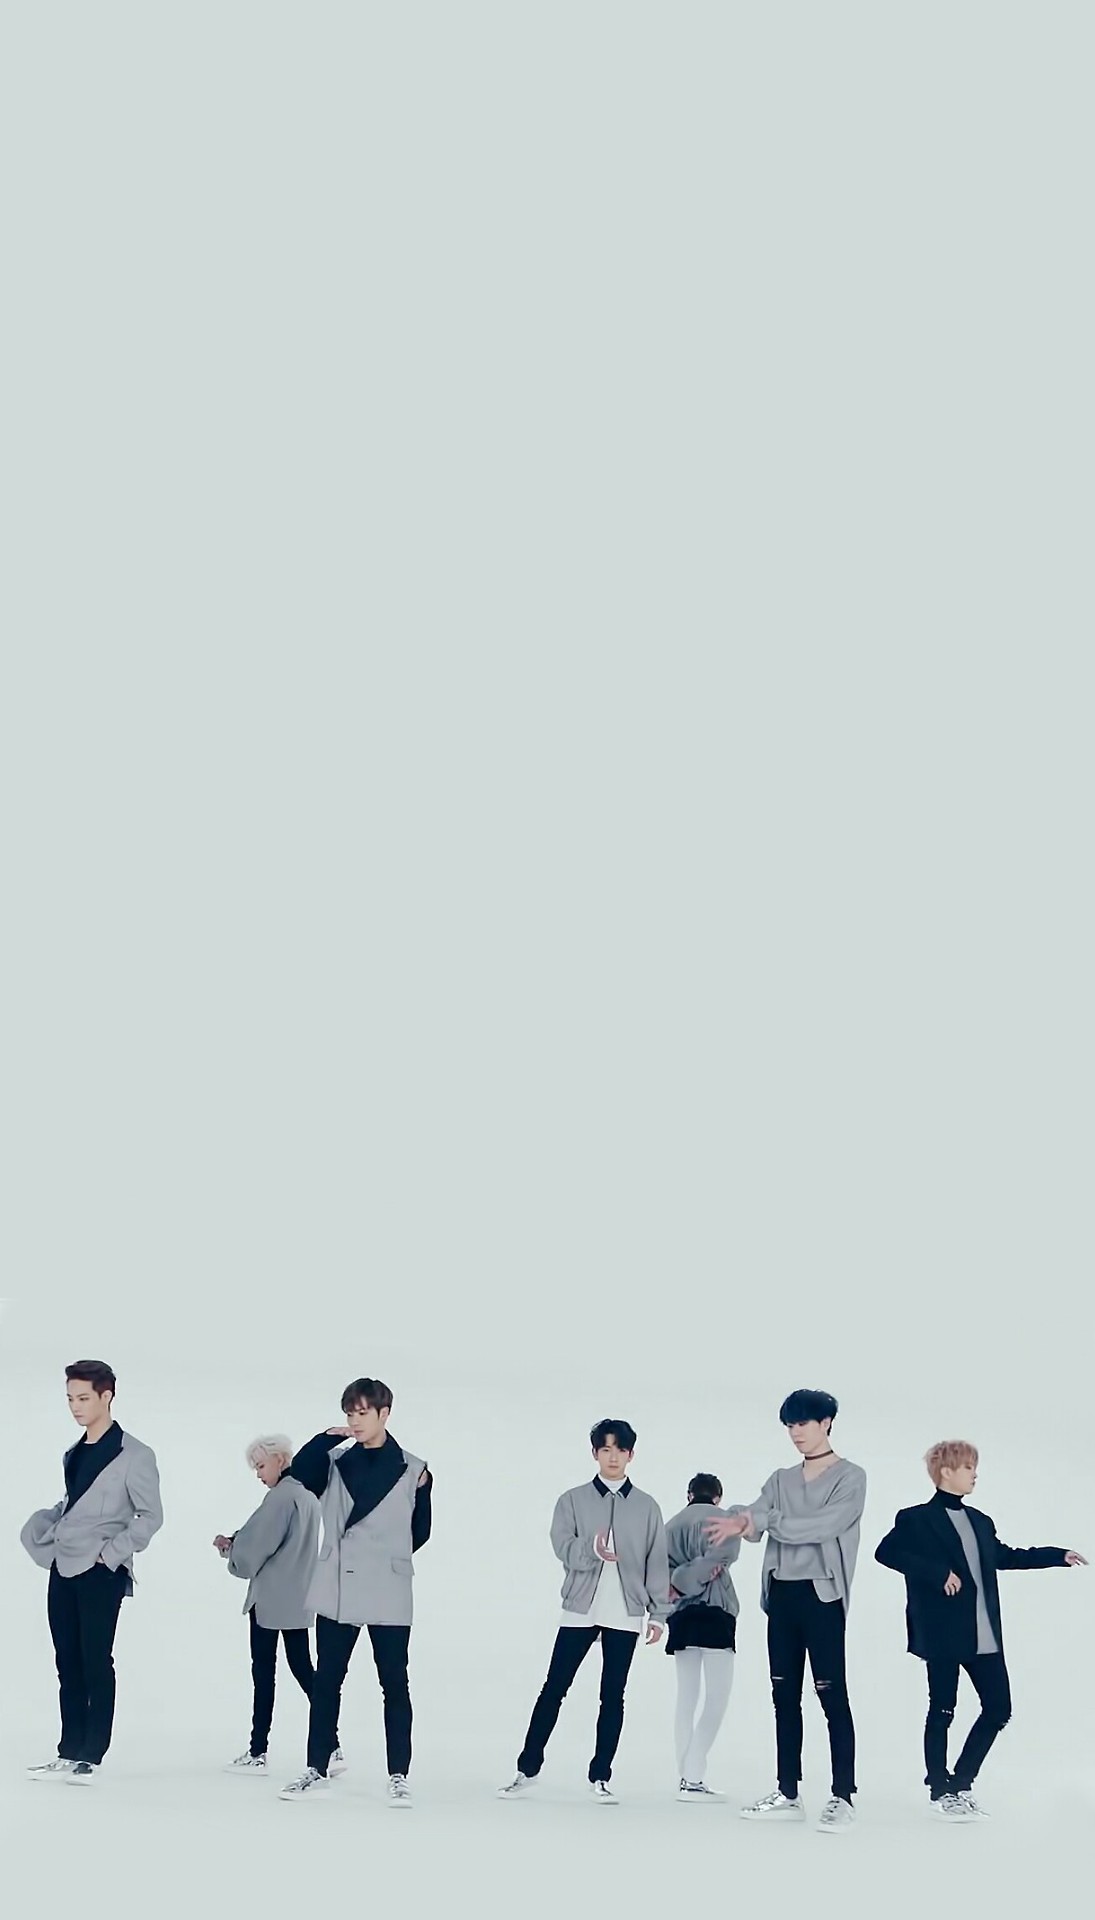 GoT7 wallpaper ·① Download free full HD backgrounds for ...